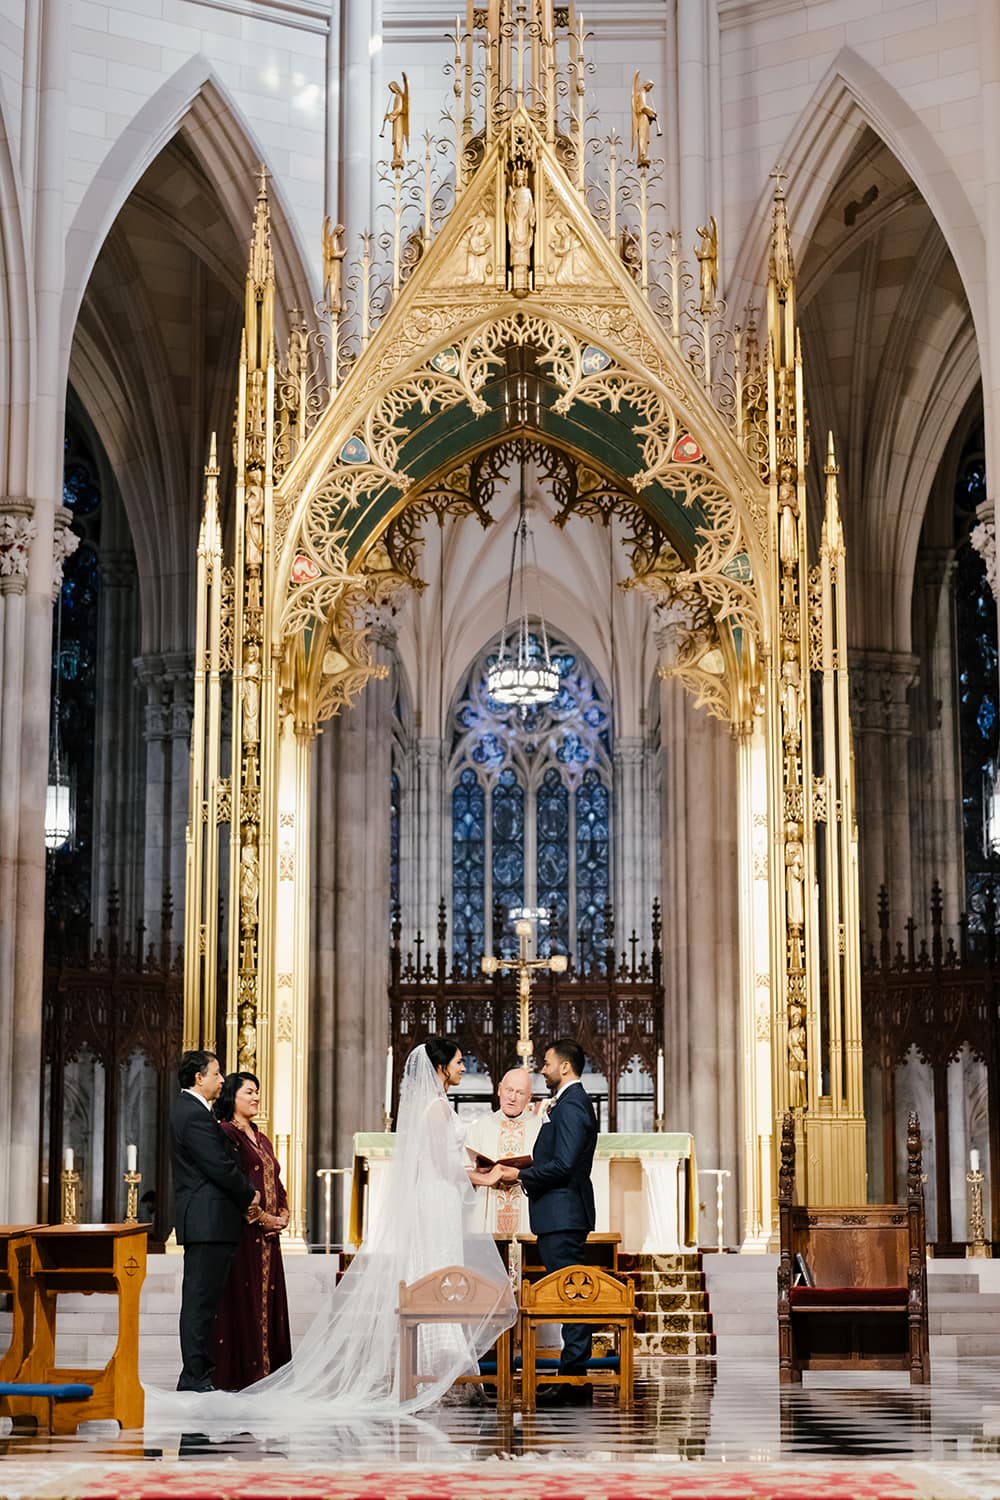 Wedding ceremony at the St. Patrick's Cathedral